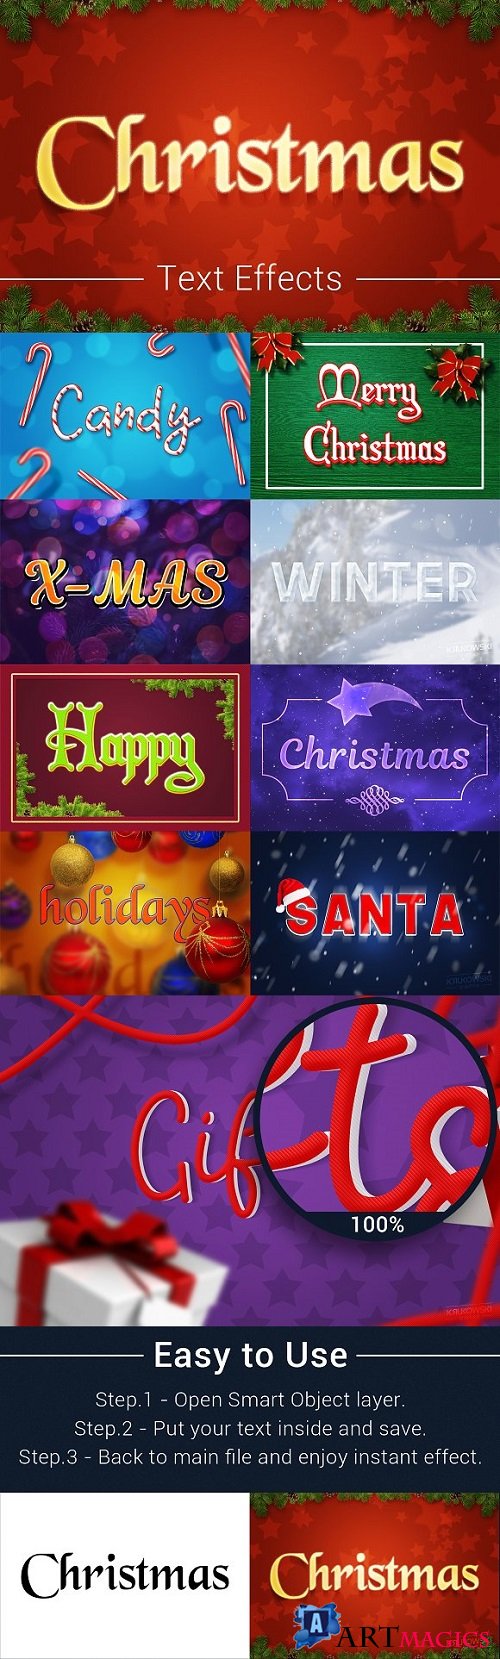 Christmas Text Effects Mockup 2162269